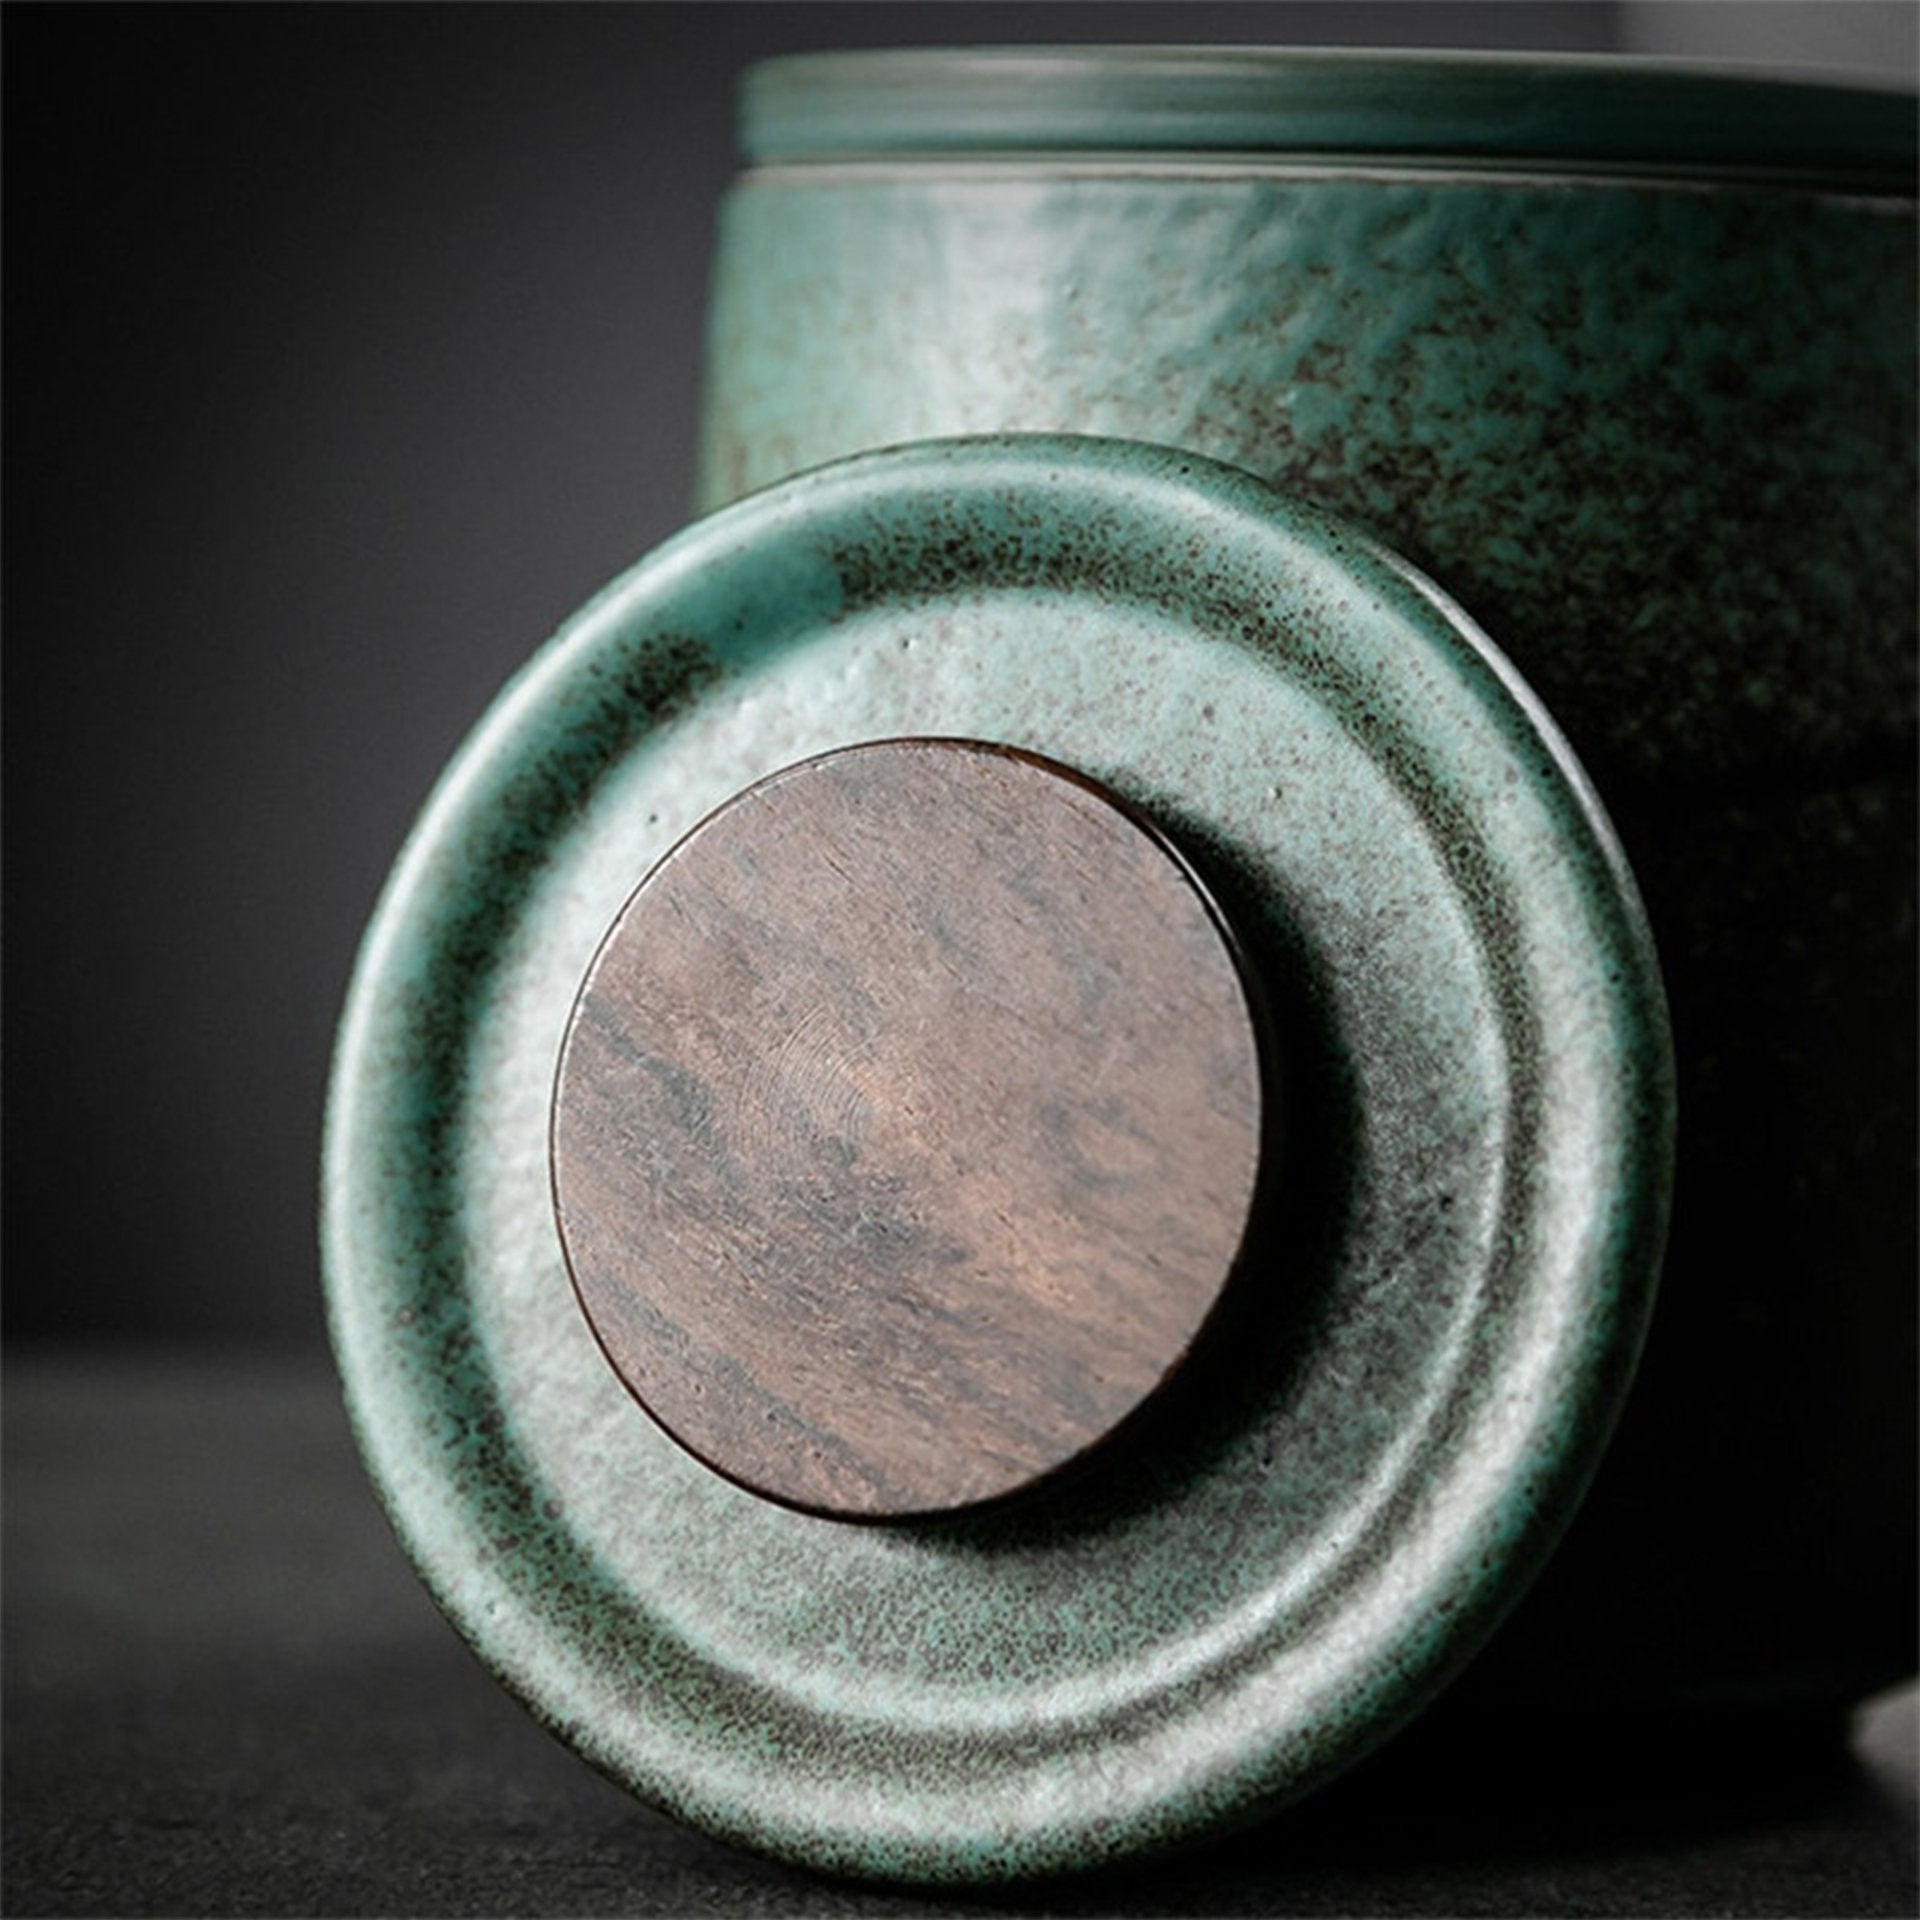 Close-up of tea mug's bottom showing its round wooden lid and textured base.